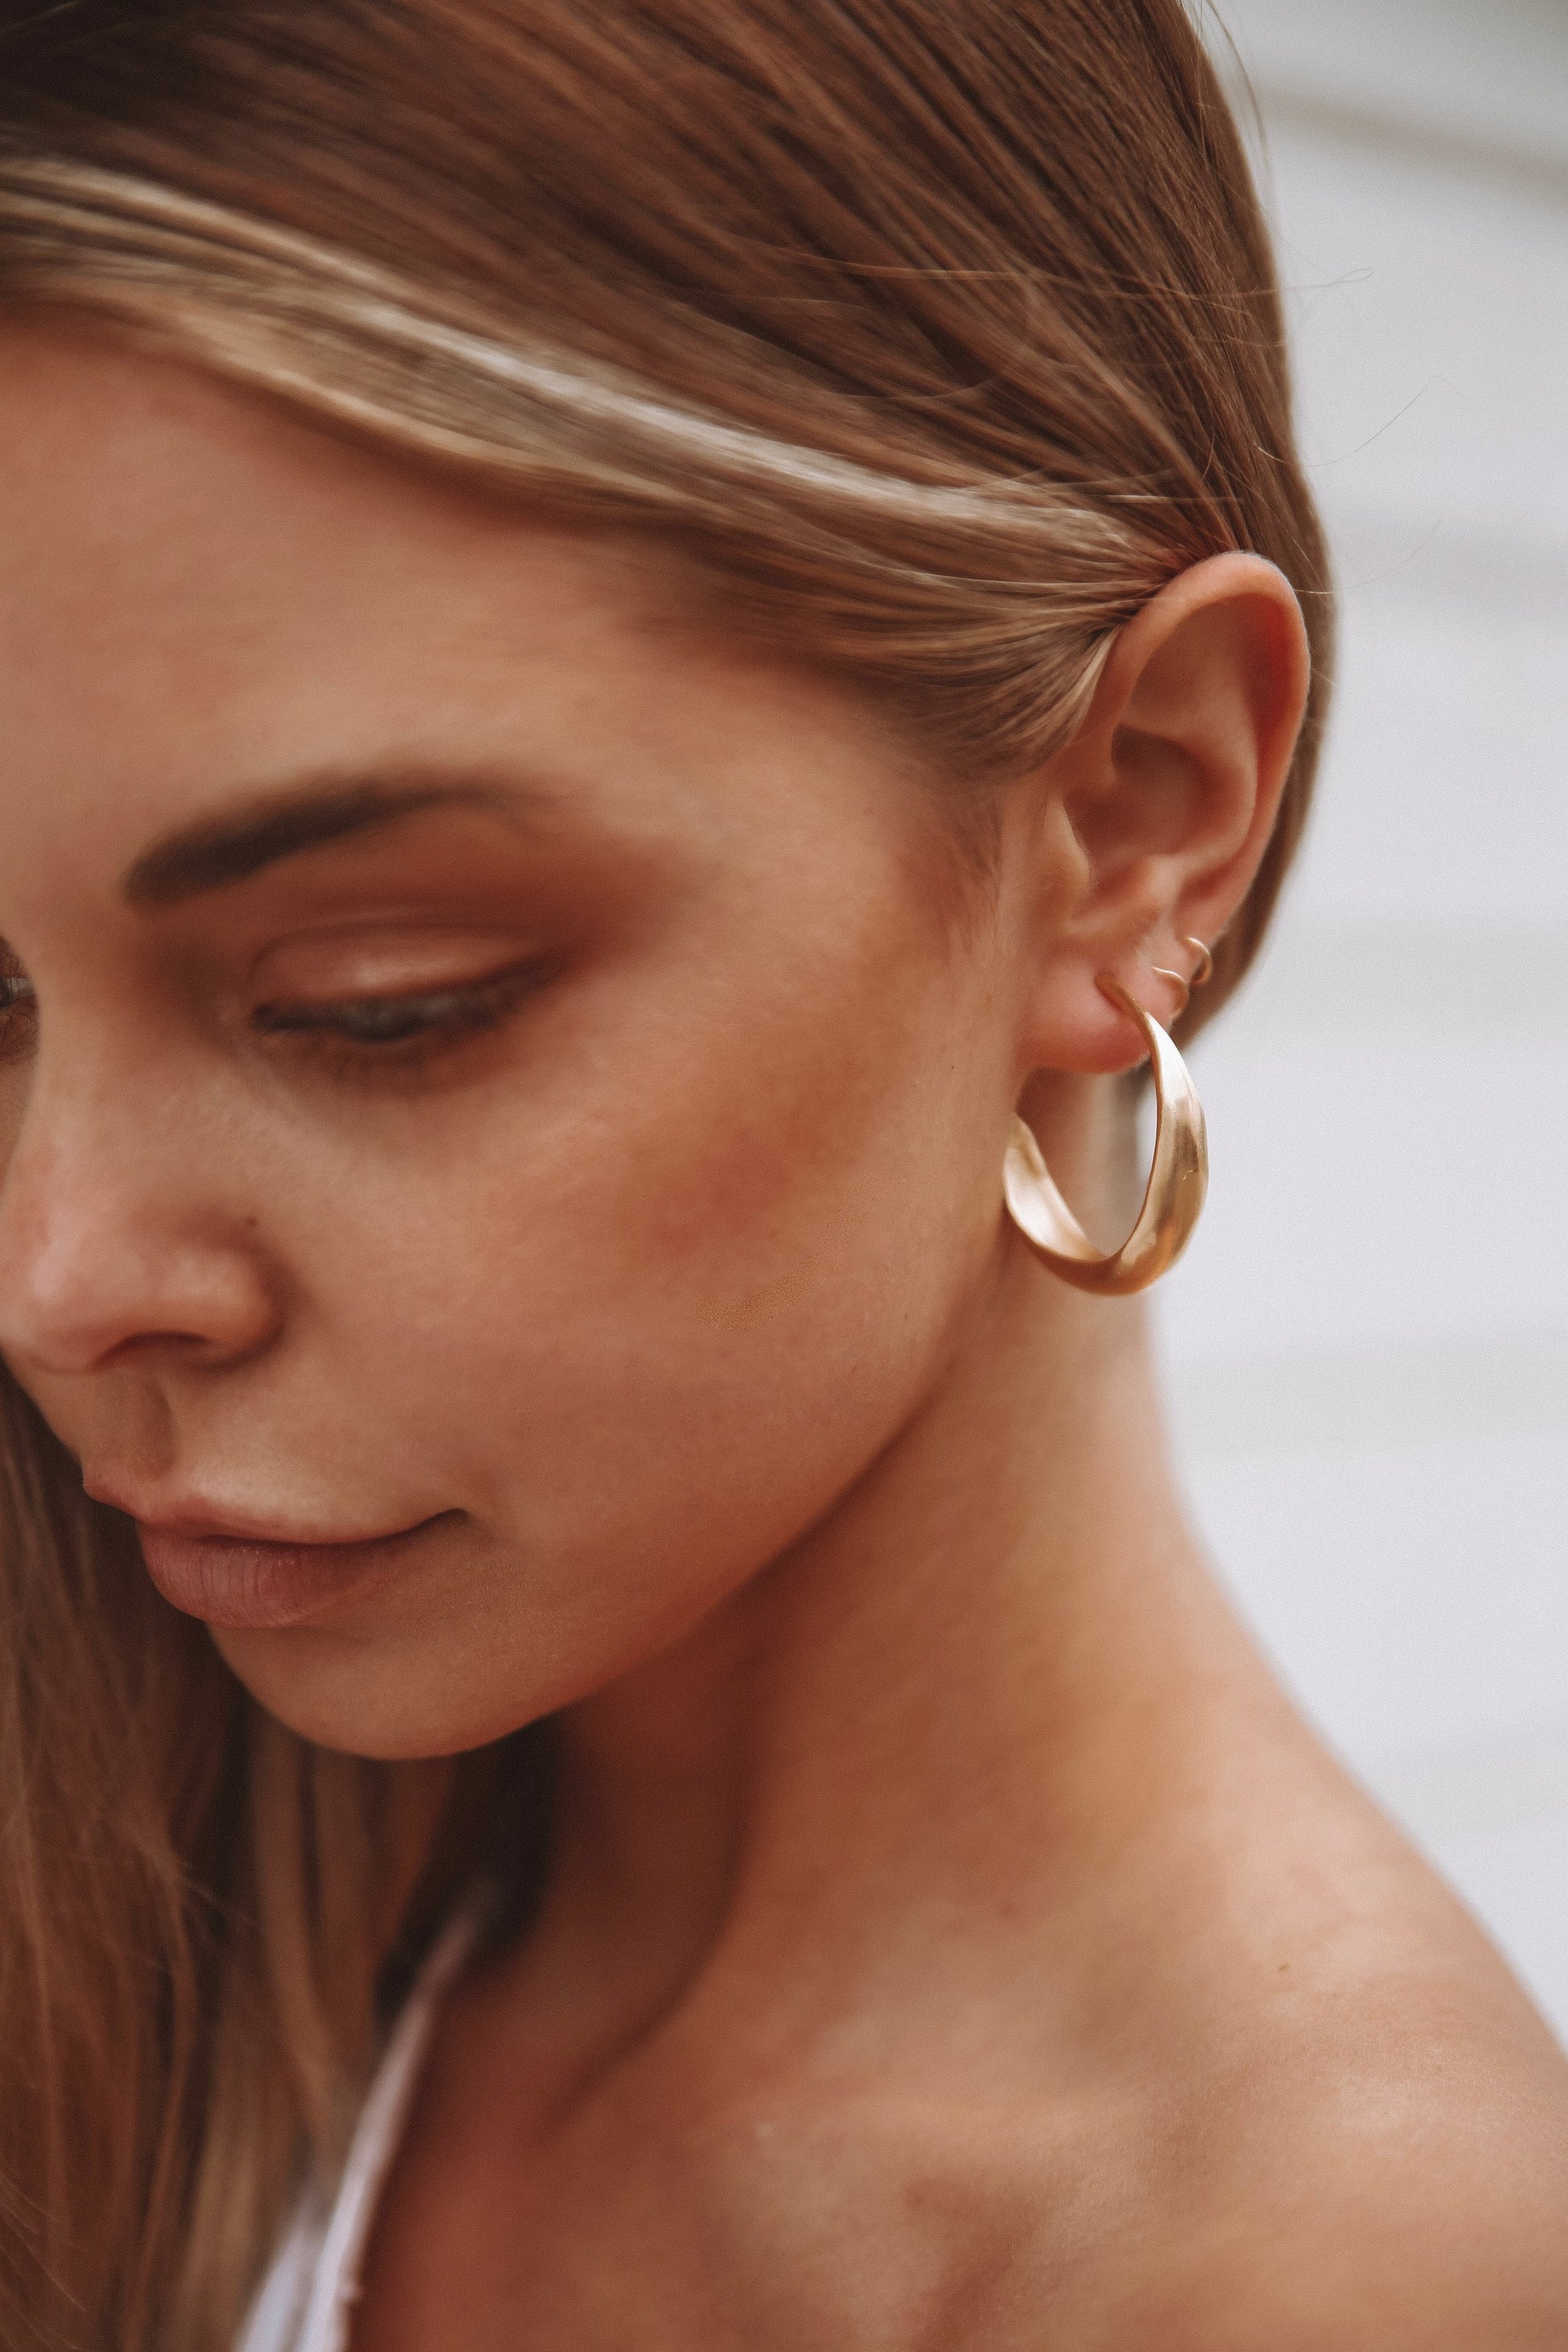 Textured organic simple light weight hoop earrings. This pair can be worn daily for a feminine, sculptural and elegant classic style. Earrings are made of recycled brass with sterling silver studs coated in a thick layer of high grade 14k gold. Handmade in the Santa Cruz Mountains.